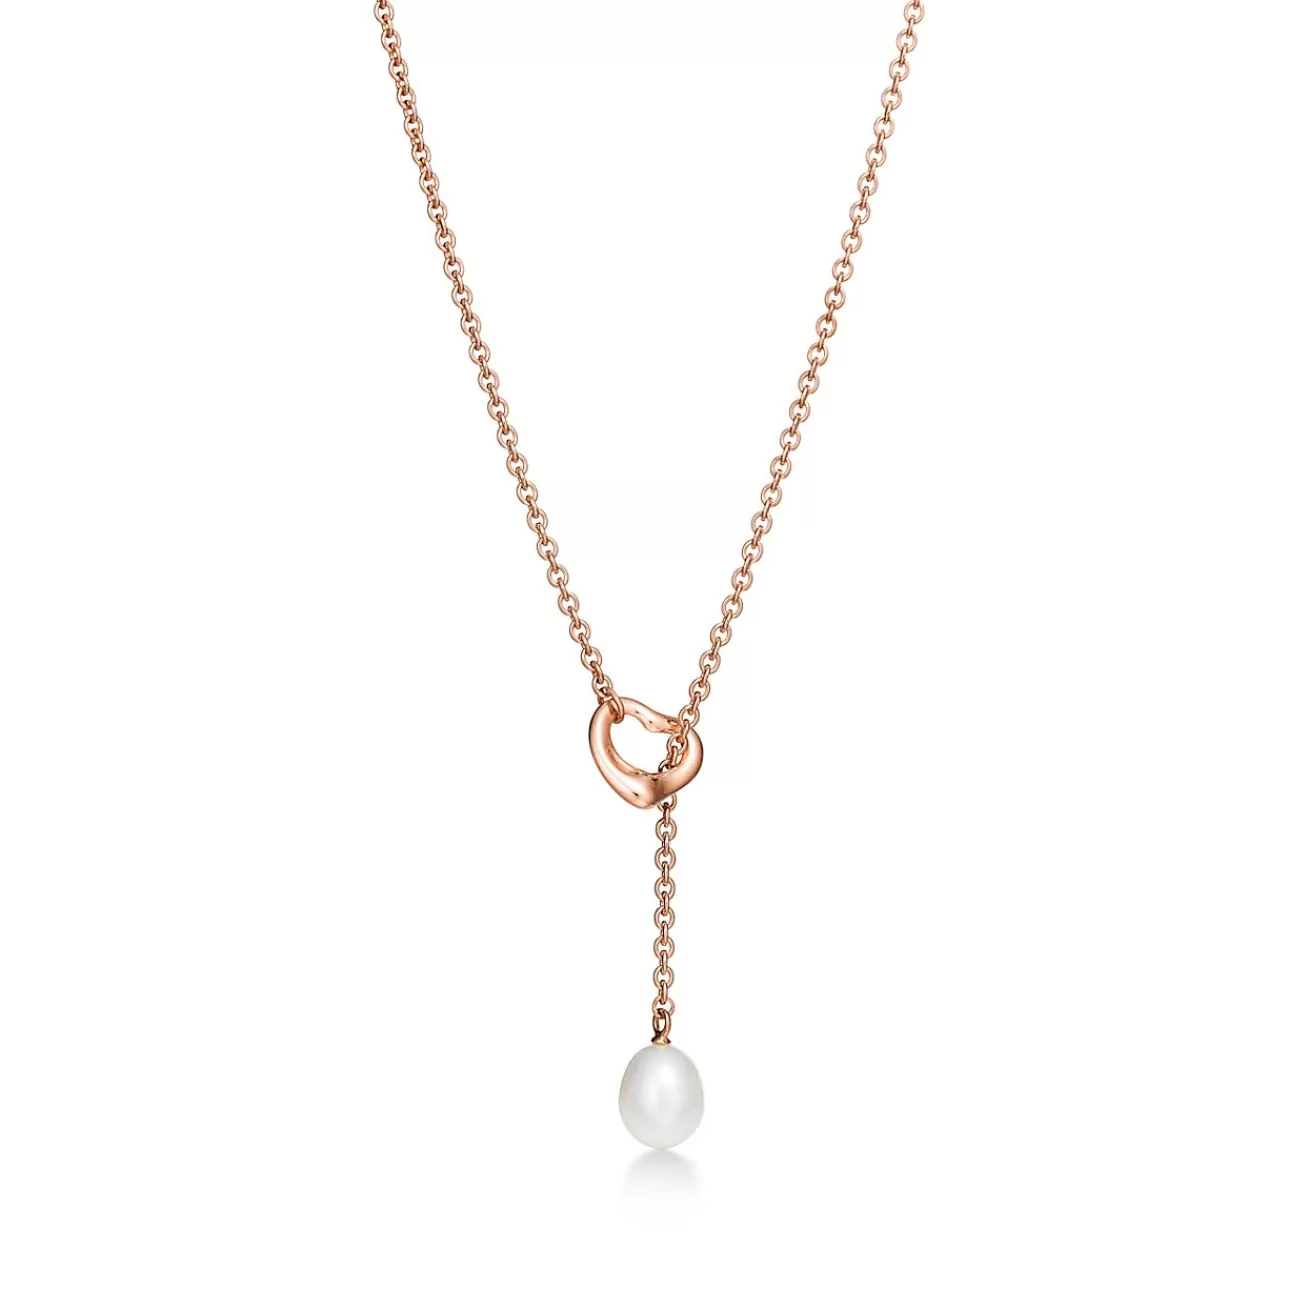 Tiffany & Co. Elsa Peretti® Open Heart lariat in 18k rose gold with a freshwater pearl. | ^ Necklaces & Pendants | Rose Gold Jewelry